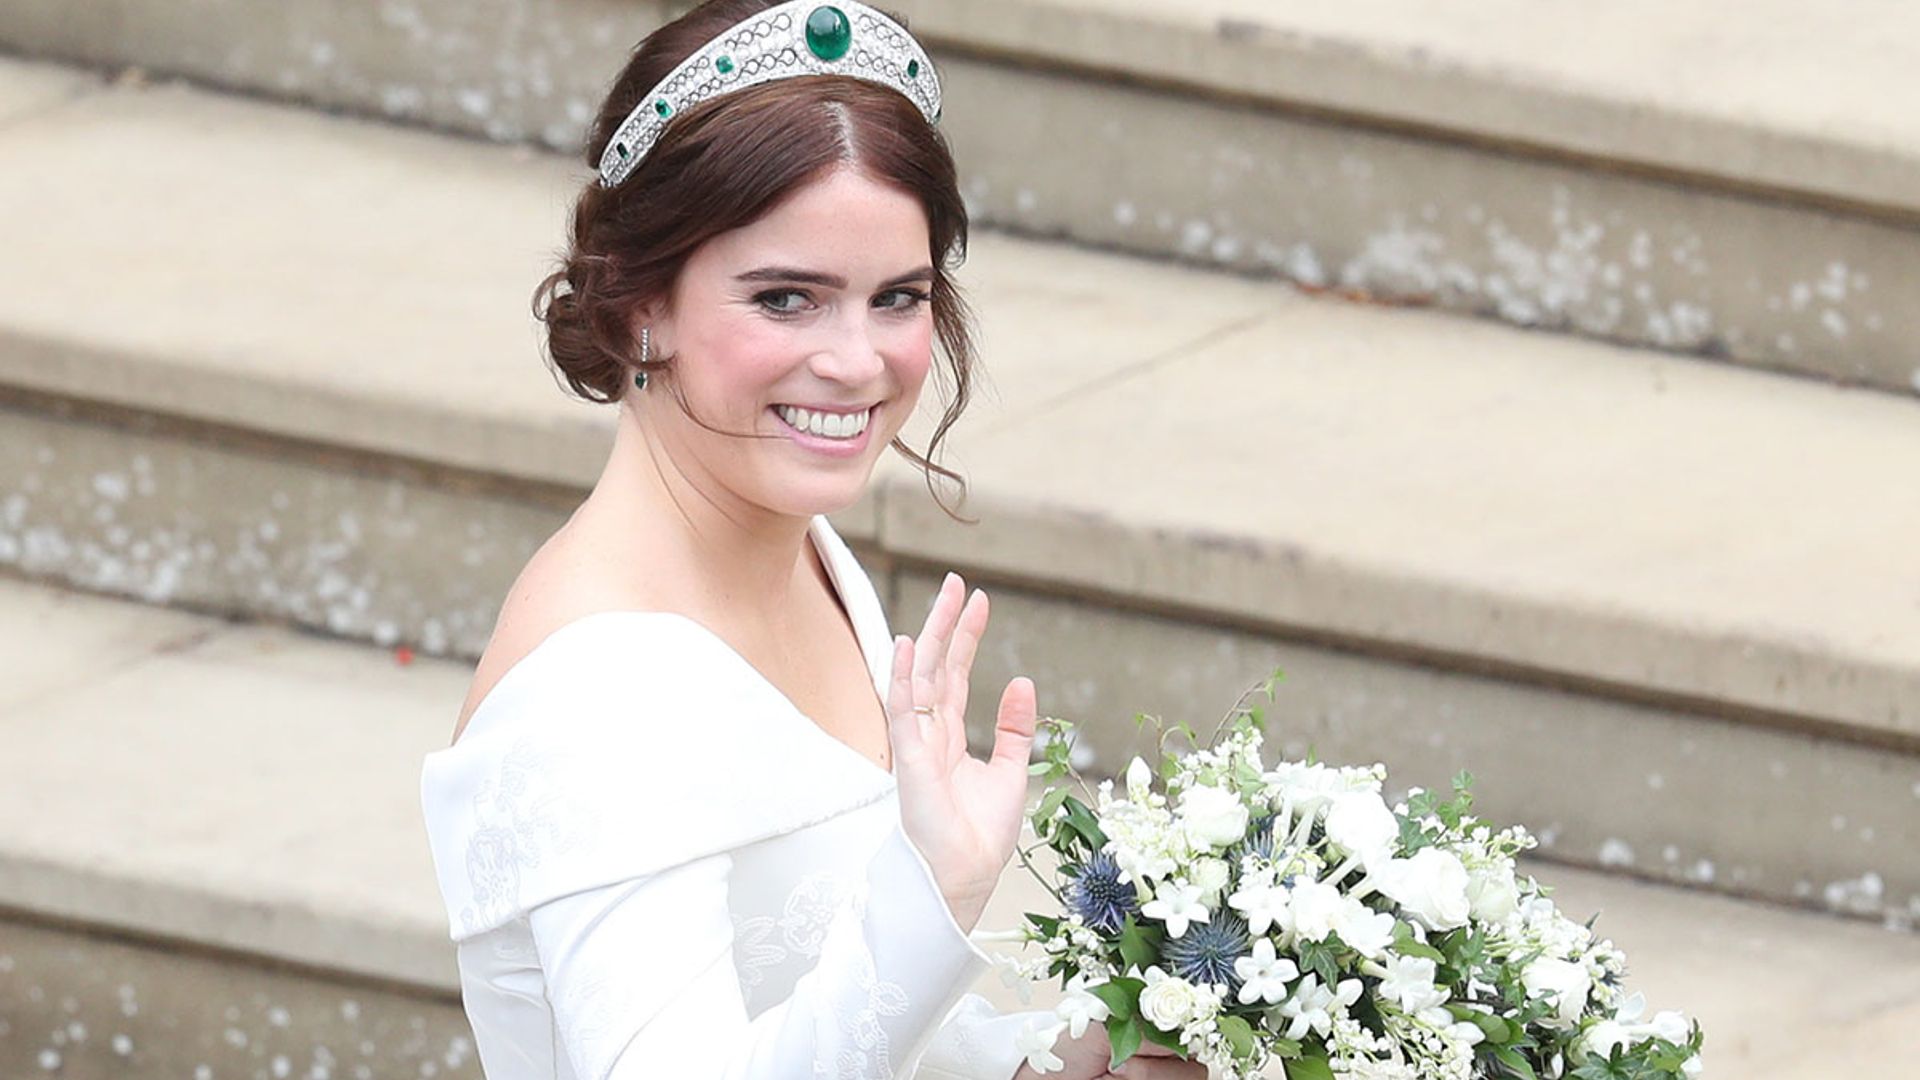 Zac Posen shares never-before-seen photo of Princess Eugenie's second wedding dress - see birthday tribute